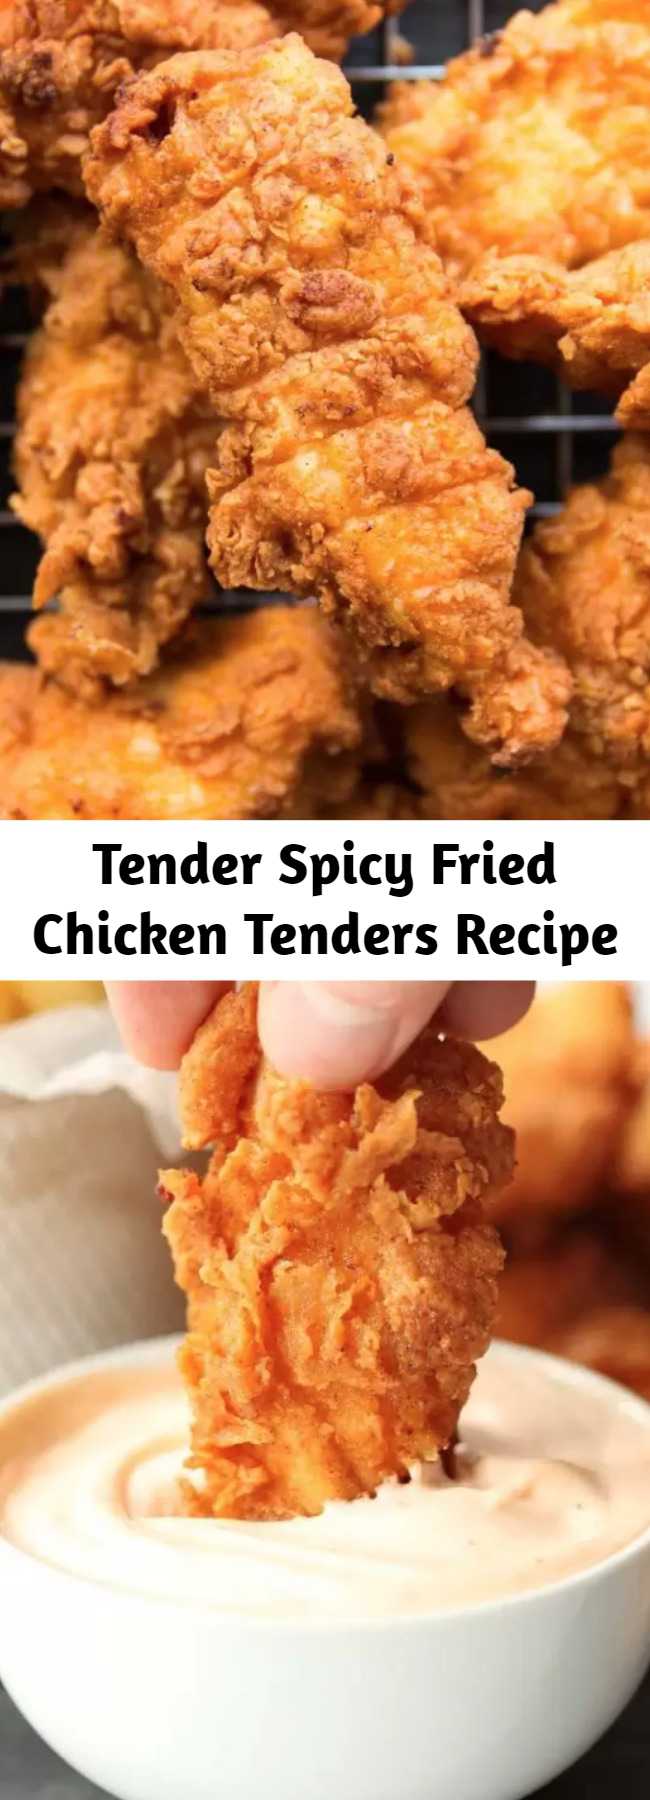 Tender Spicy Fried Chicken Tenders Recipe - These Spicy Chicken Tenders are ridiculously delicious! Chicken strips marinated in buttermilk and hot sauce, then deep fried for extra crispiness. Need I say more?! #chicken #chickentenders #chickenstrips #spicychicken #friedchicken